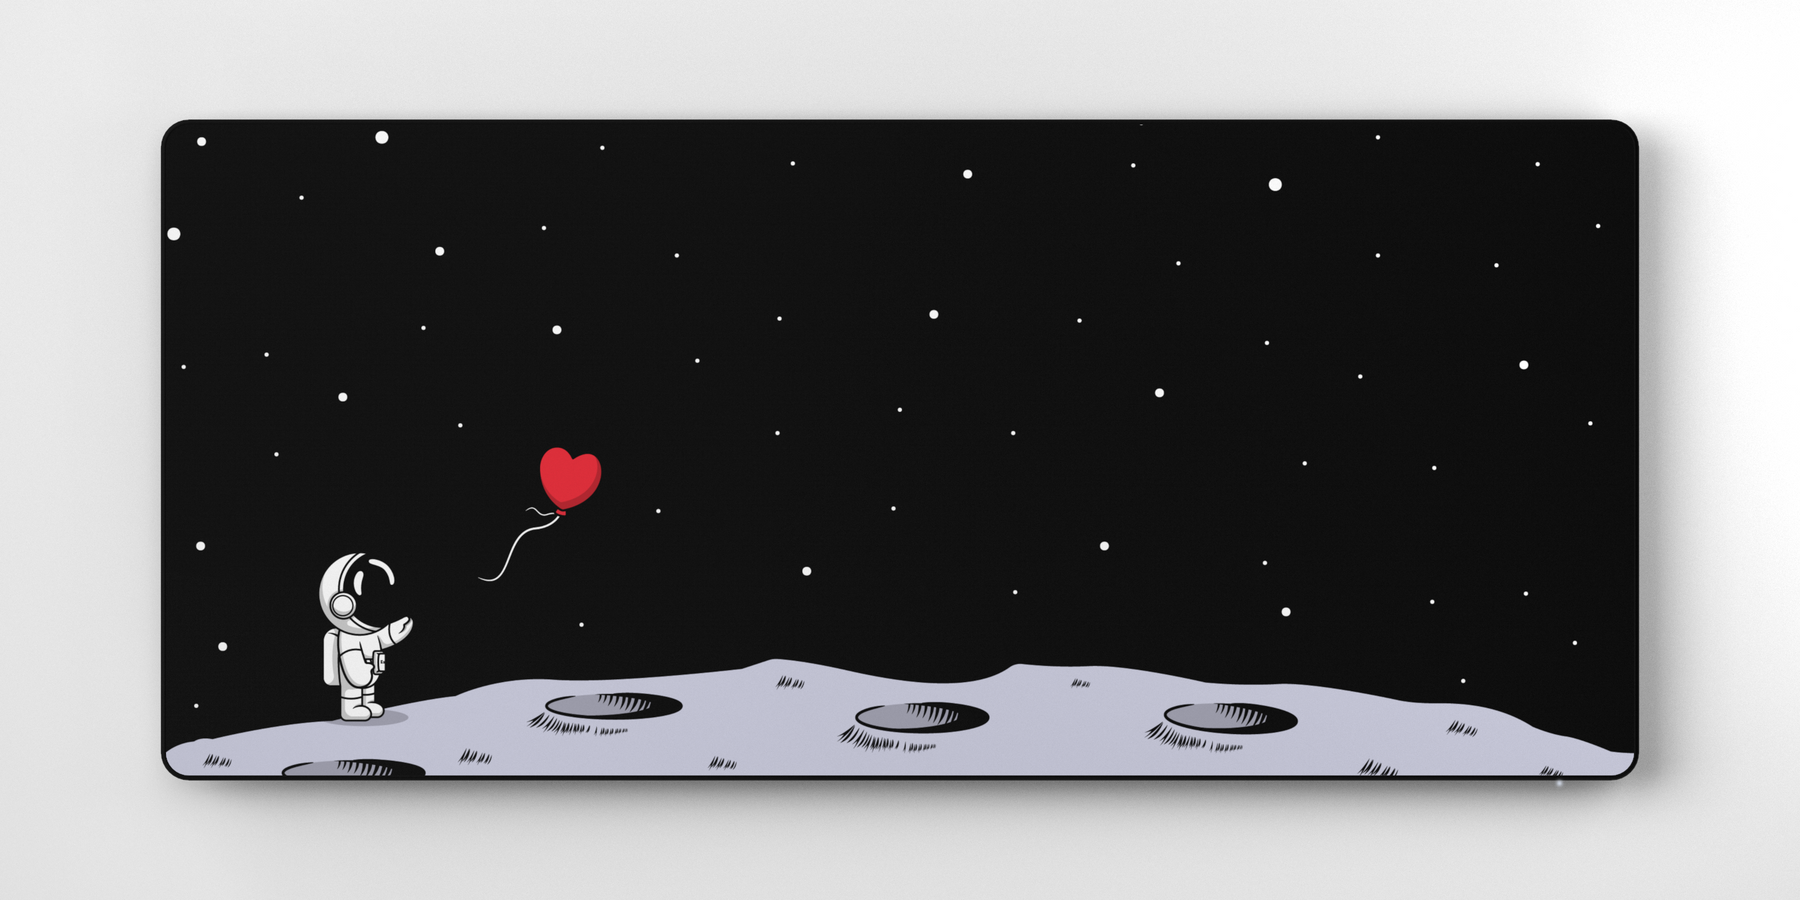 With Love Deskmats